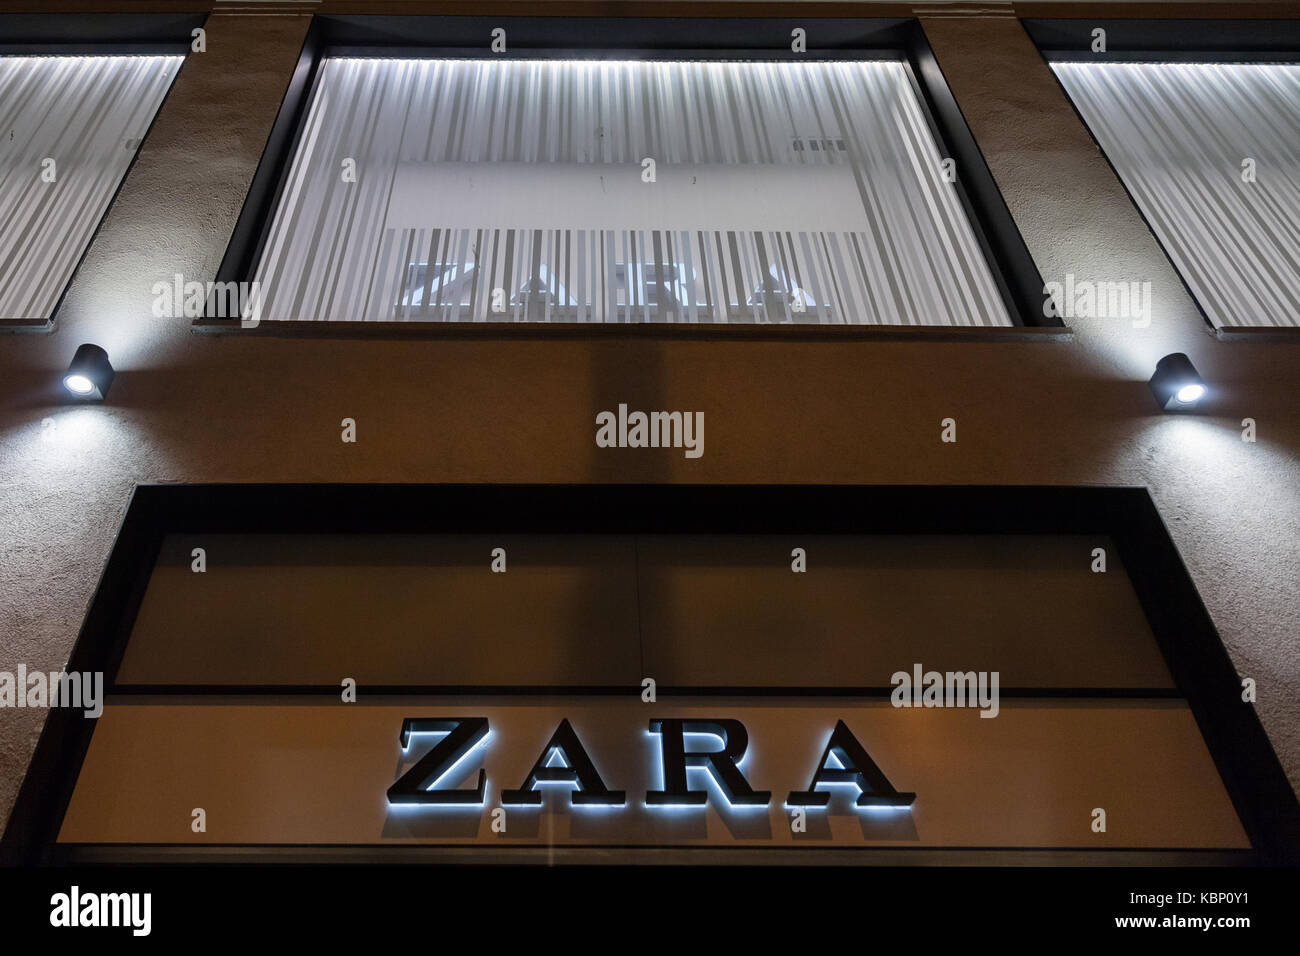 Zara Logo High Resolution Stock Photography and Images - Alamy